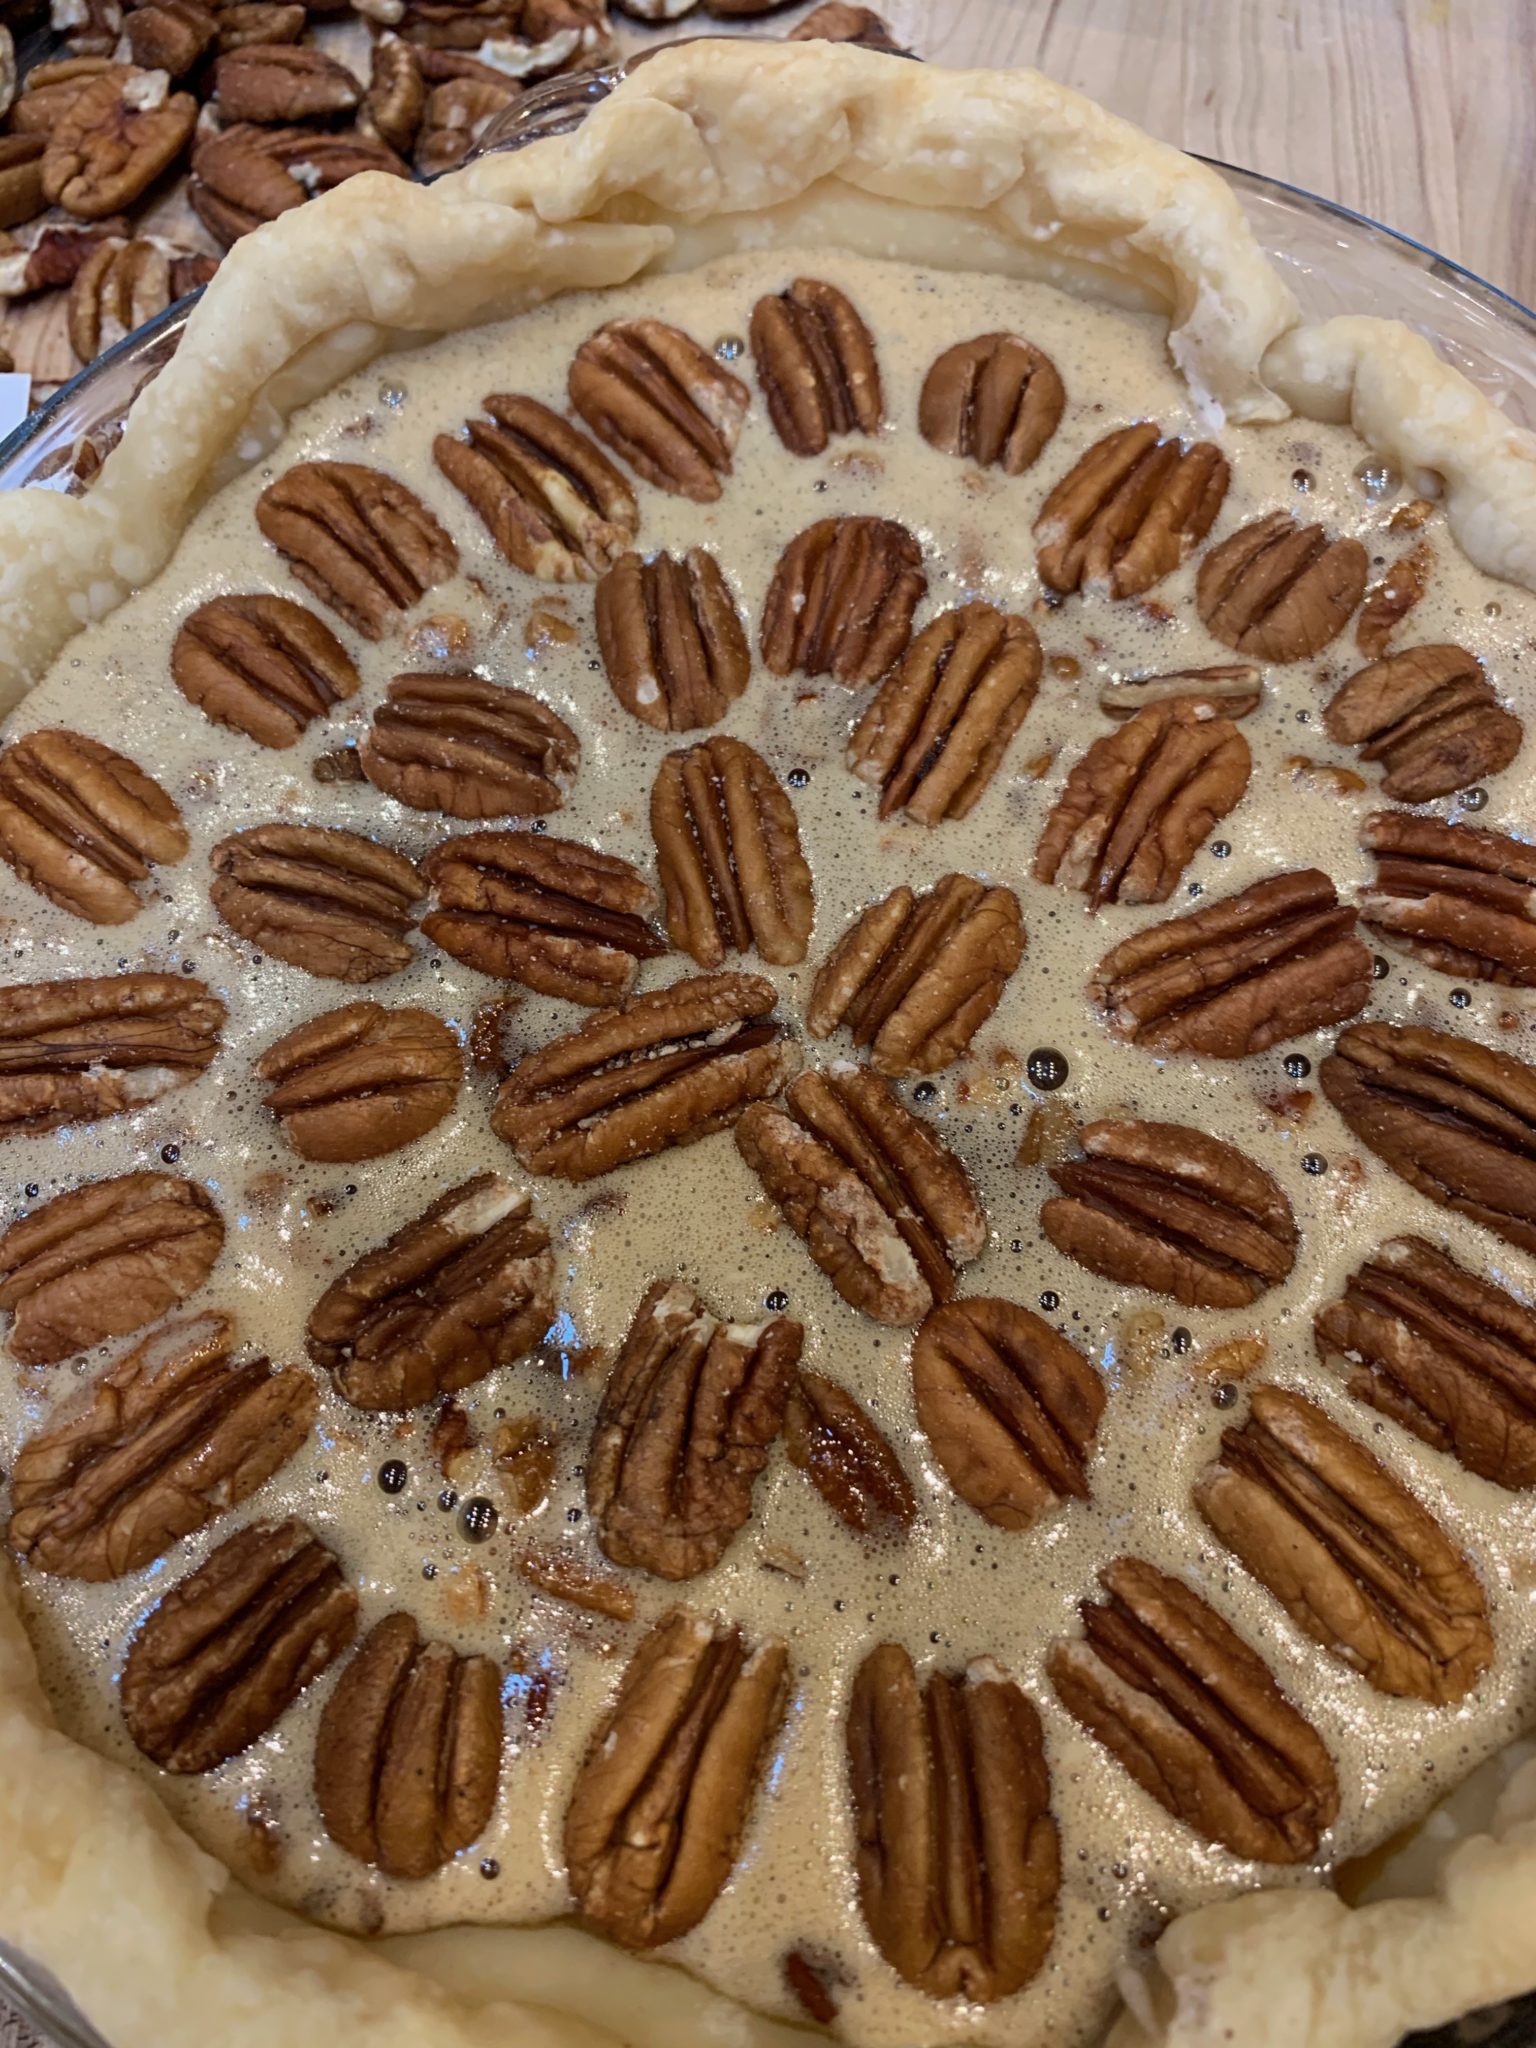 Showing a pecan pie decorated with pecan halves before baking